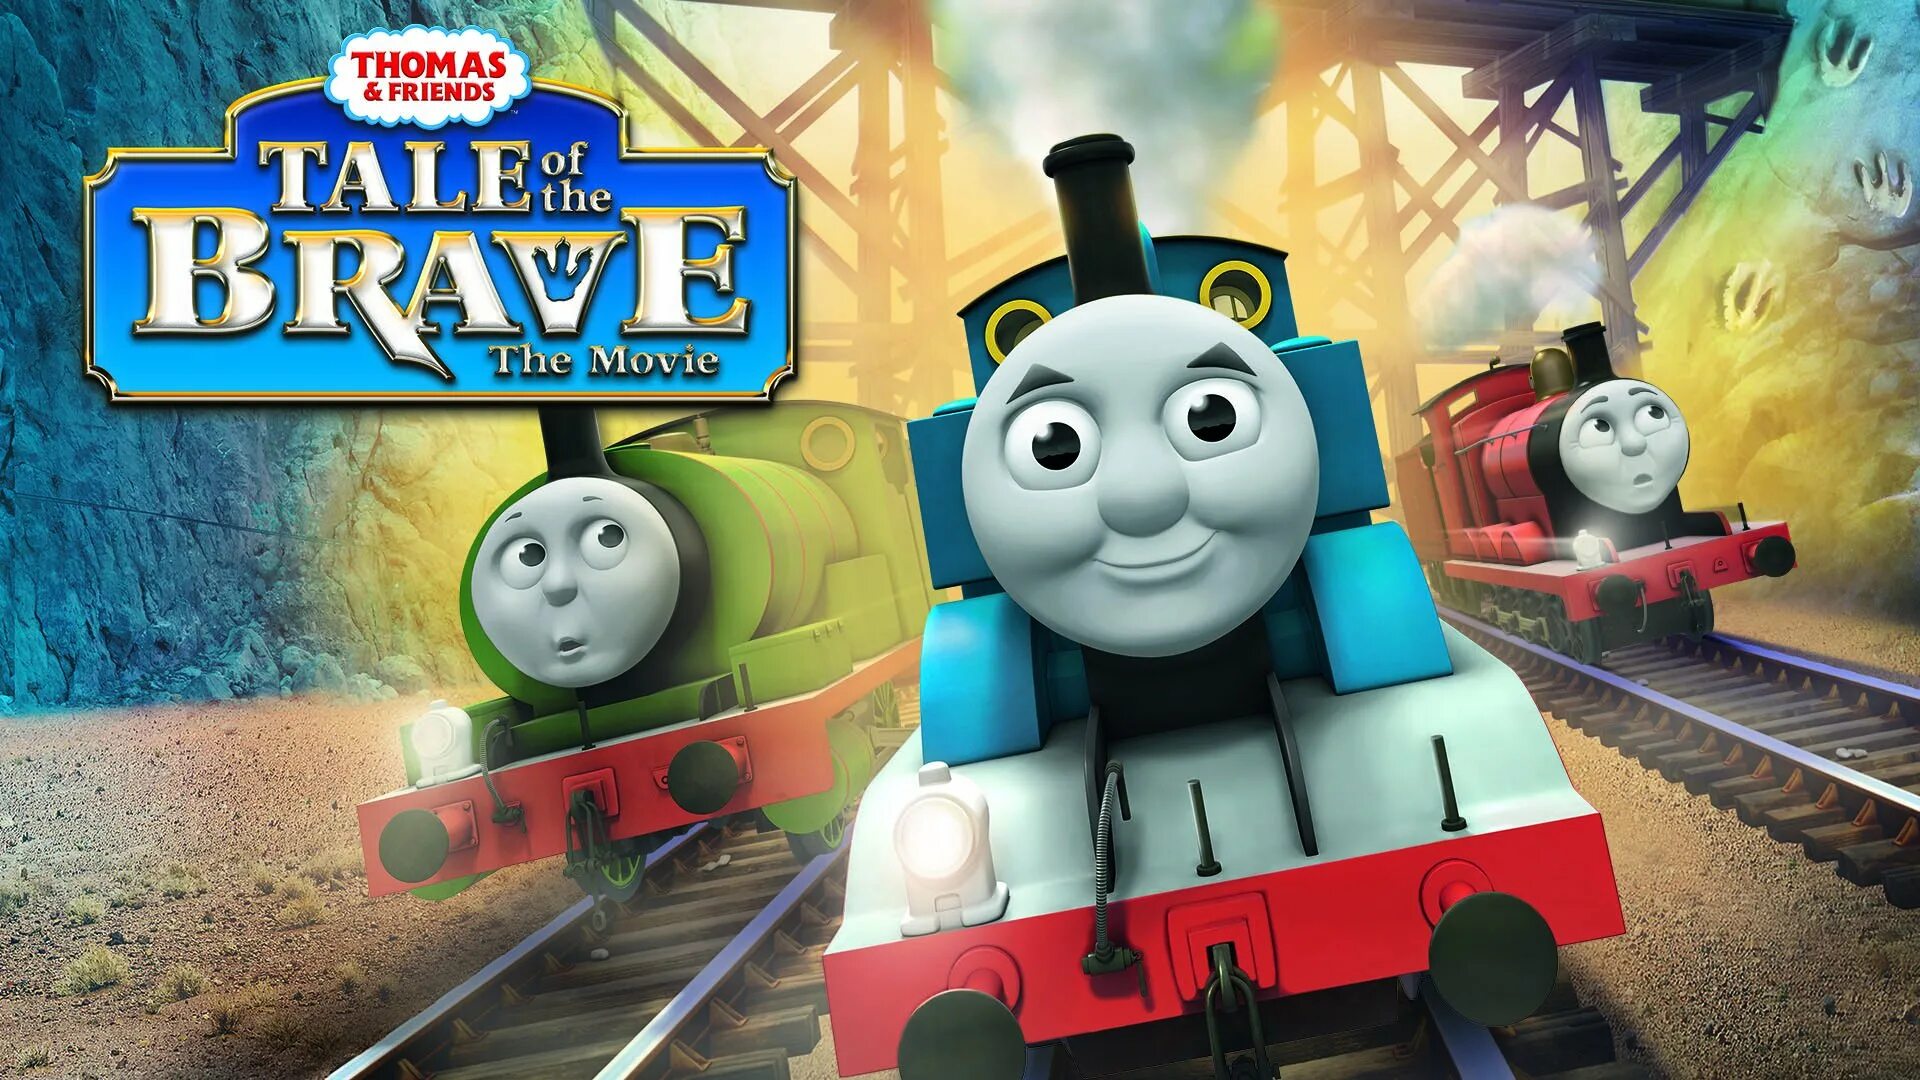 Toms tales. Thomas and friends. Thomas and friends 2014.